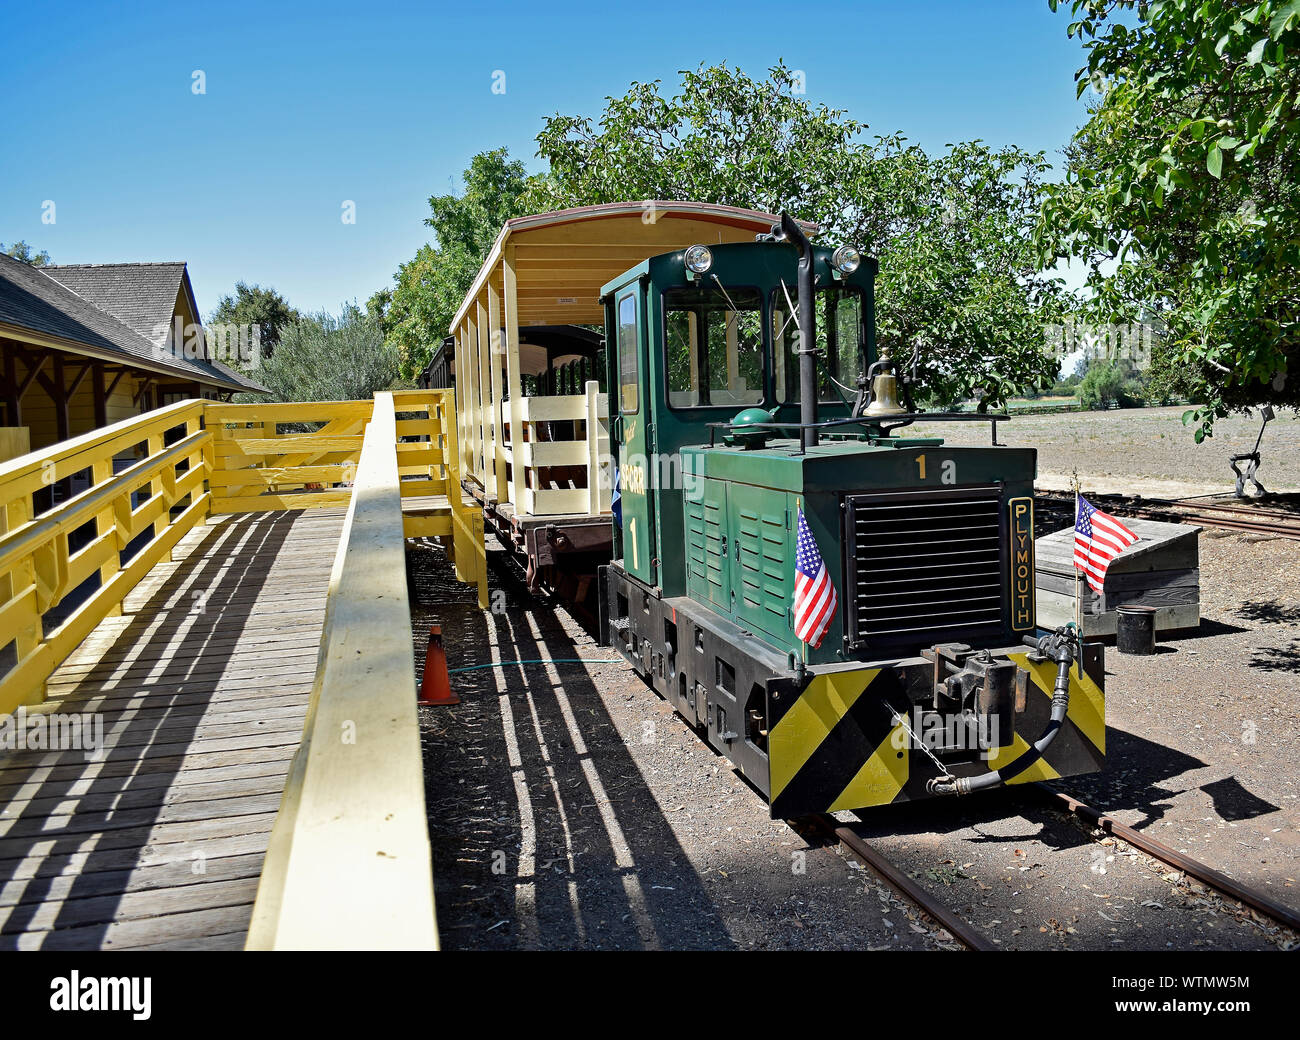 Plymouth locomotive and picnic car at Arden train station, Ardenwood Historic Farm, Fremont, California Stock Photo